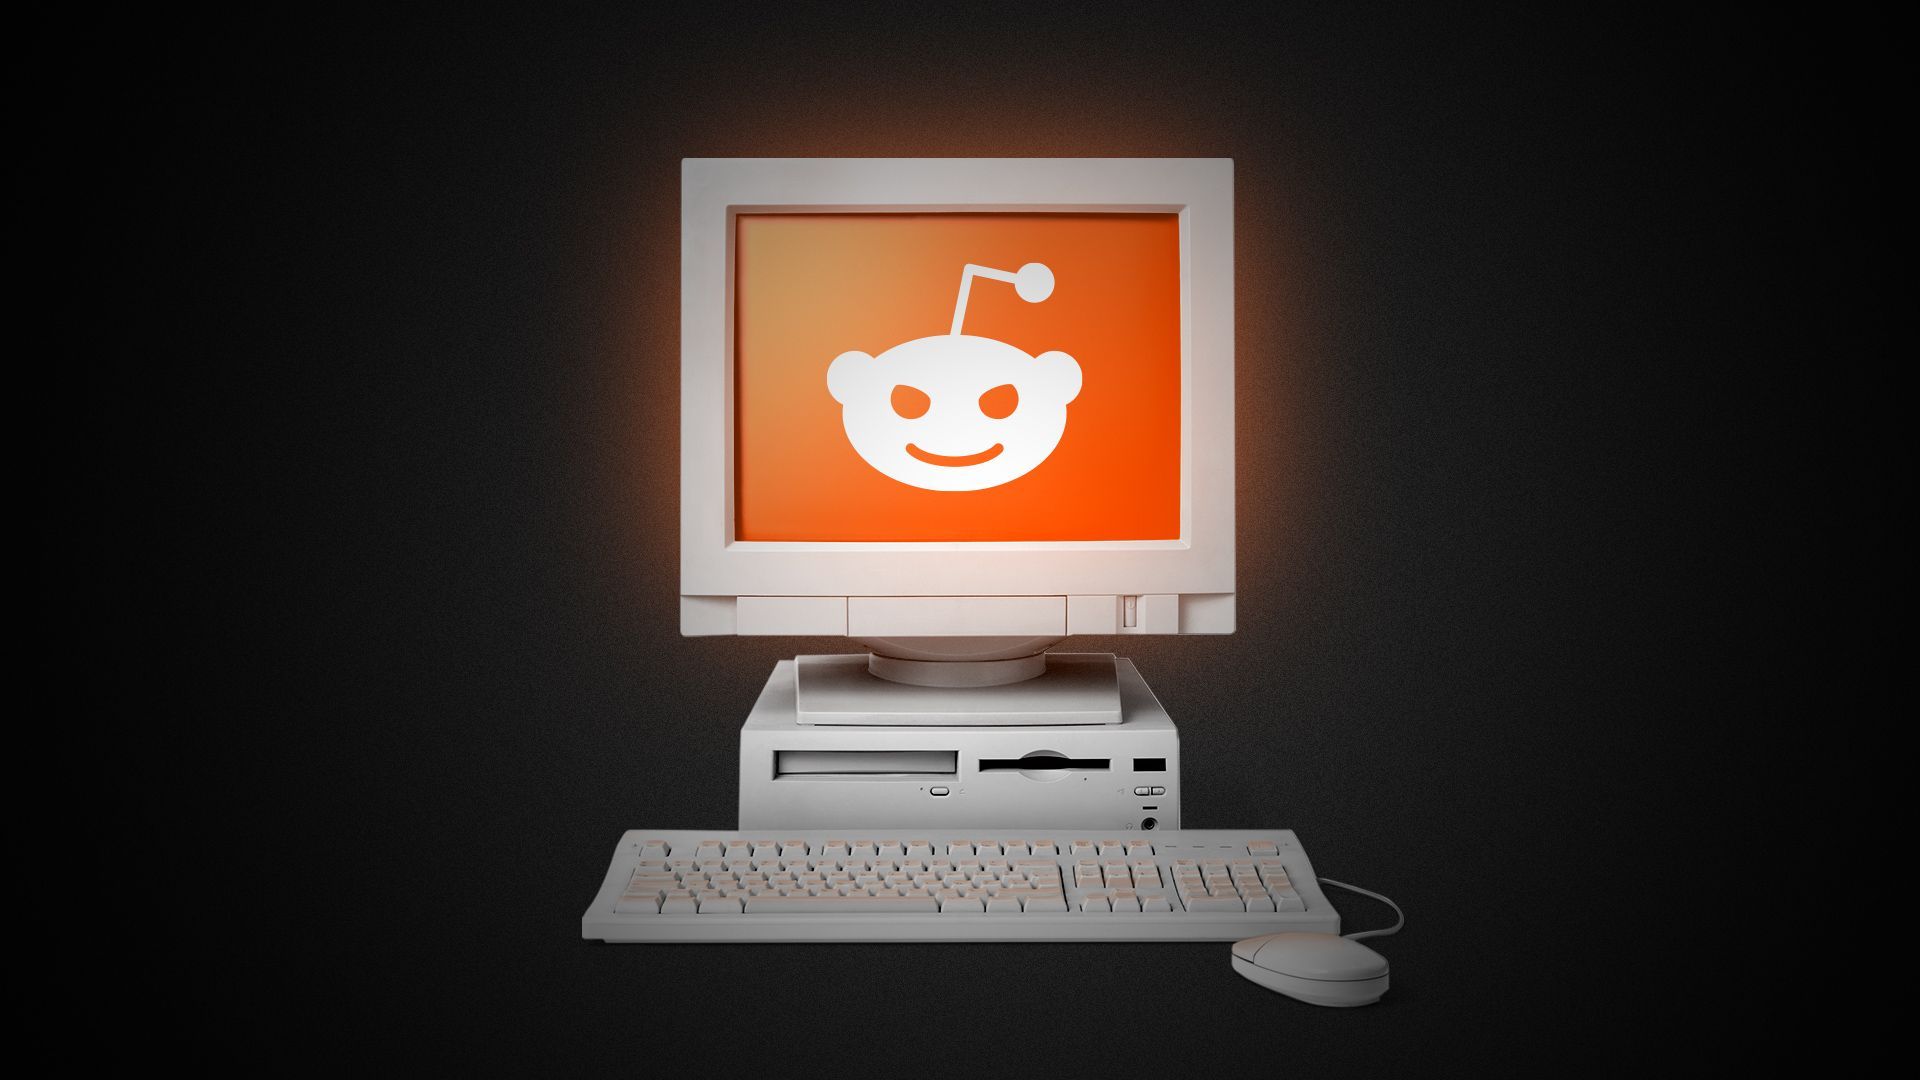 Illustration of a glowing computer in the dark with the Reddit Alien on screen looking menacing.  